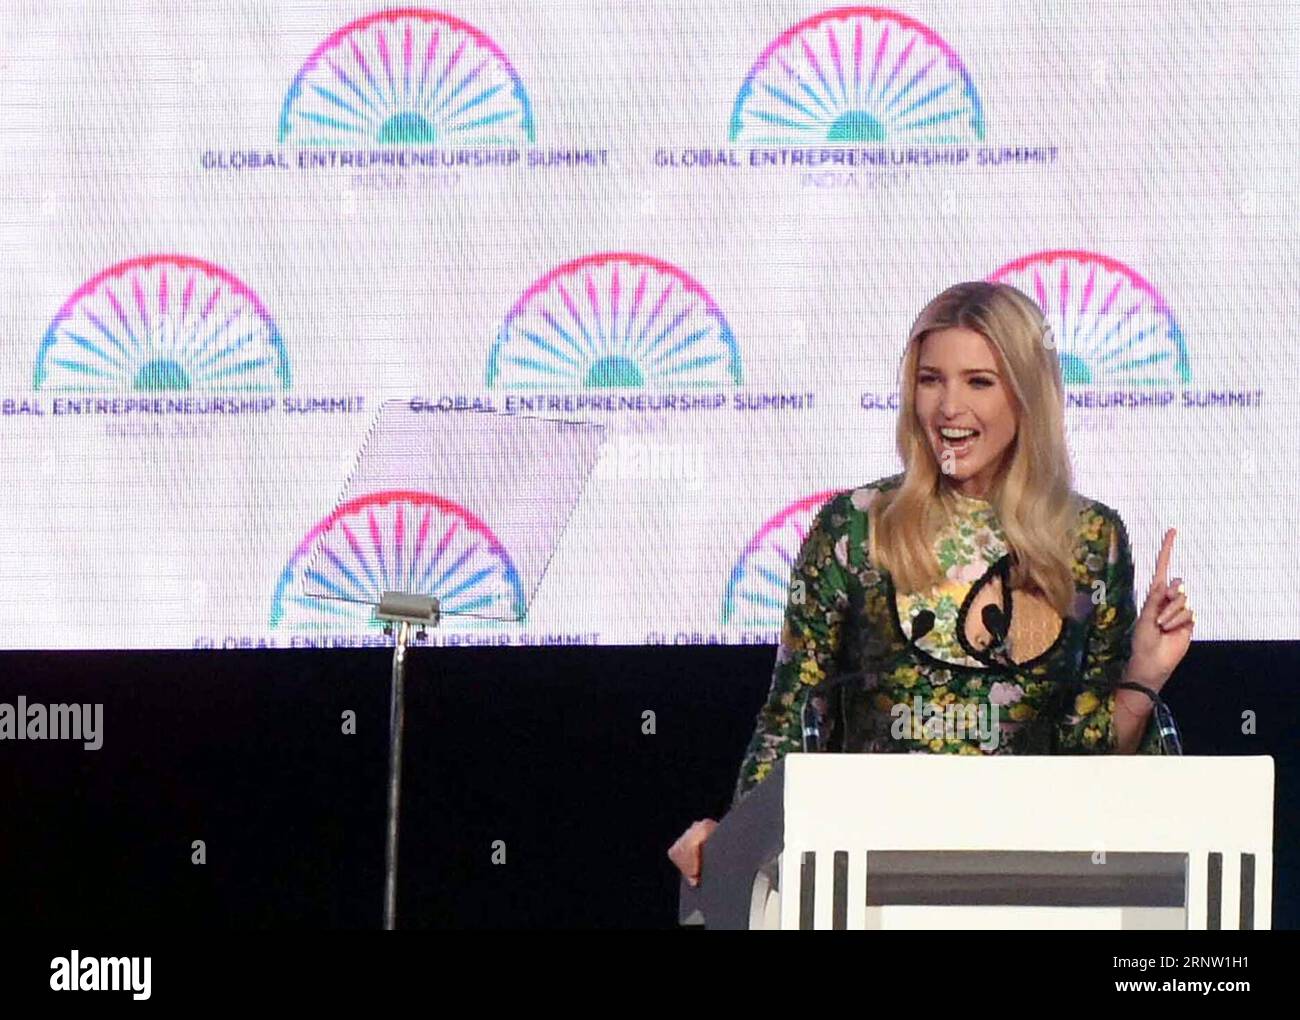 (171128) -- NEW DEHLI, Nov. 28, 2017 -- Ivanka Trump, the daughter and adviser of U.S. President Donald Trump, attends the opening of the Global Entrepreneurship Summit in Hyderabad, India, Nov. 28, 2017. )(zf) INDIA-NEW DEHLI-U.S.-IVANLA TRUMP-GLOBAL ENTREPRENEURSHIP SUMMIT Stringer PUBLICATIONxNOTxINxCHN Stock Photo